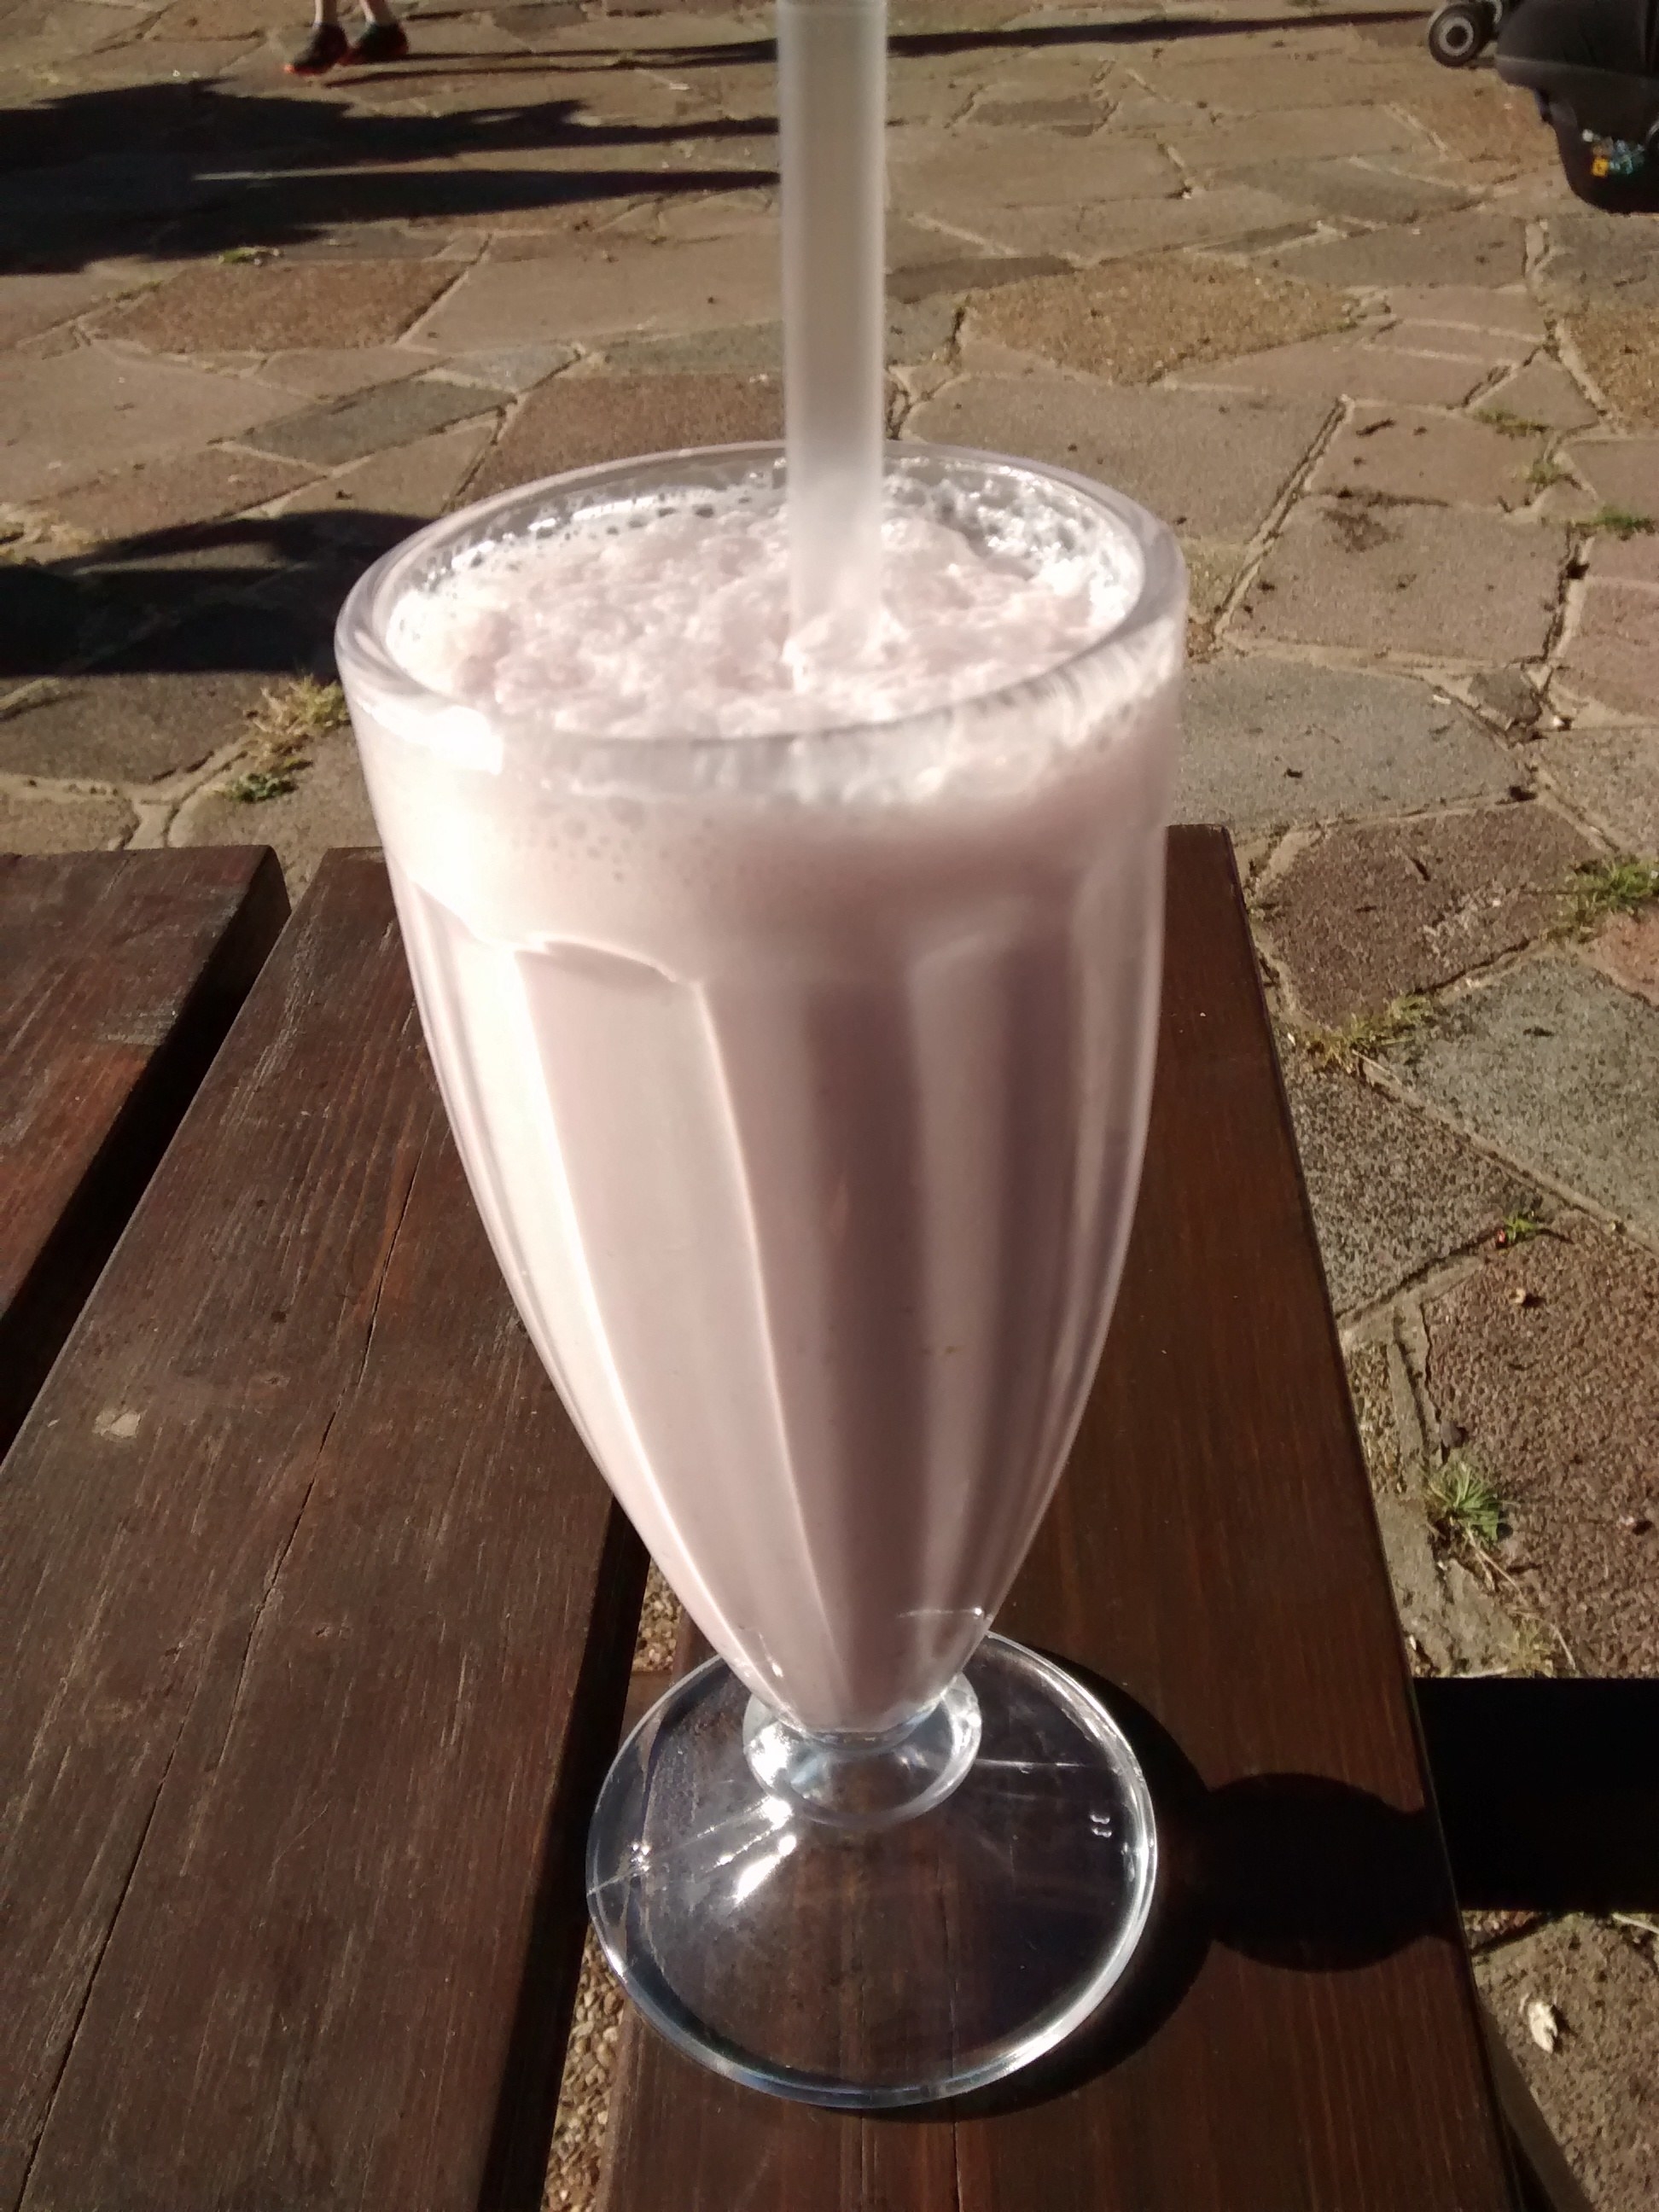 A tall glass filled with chocolate milkshake